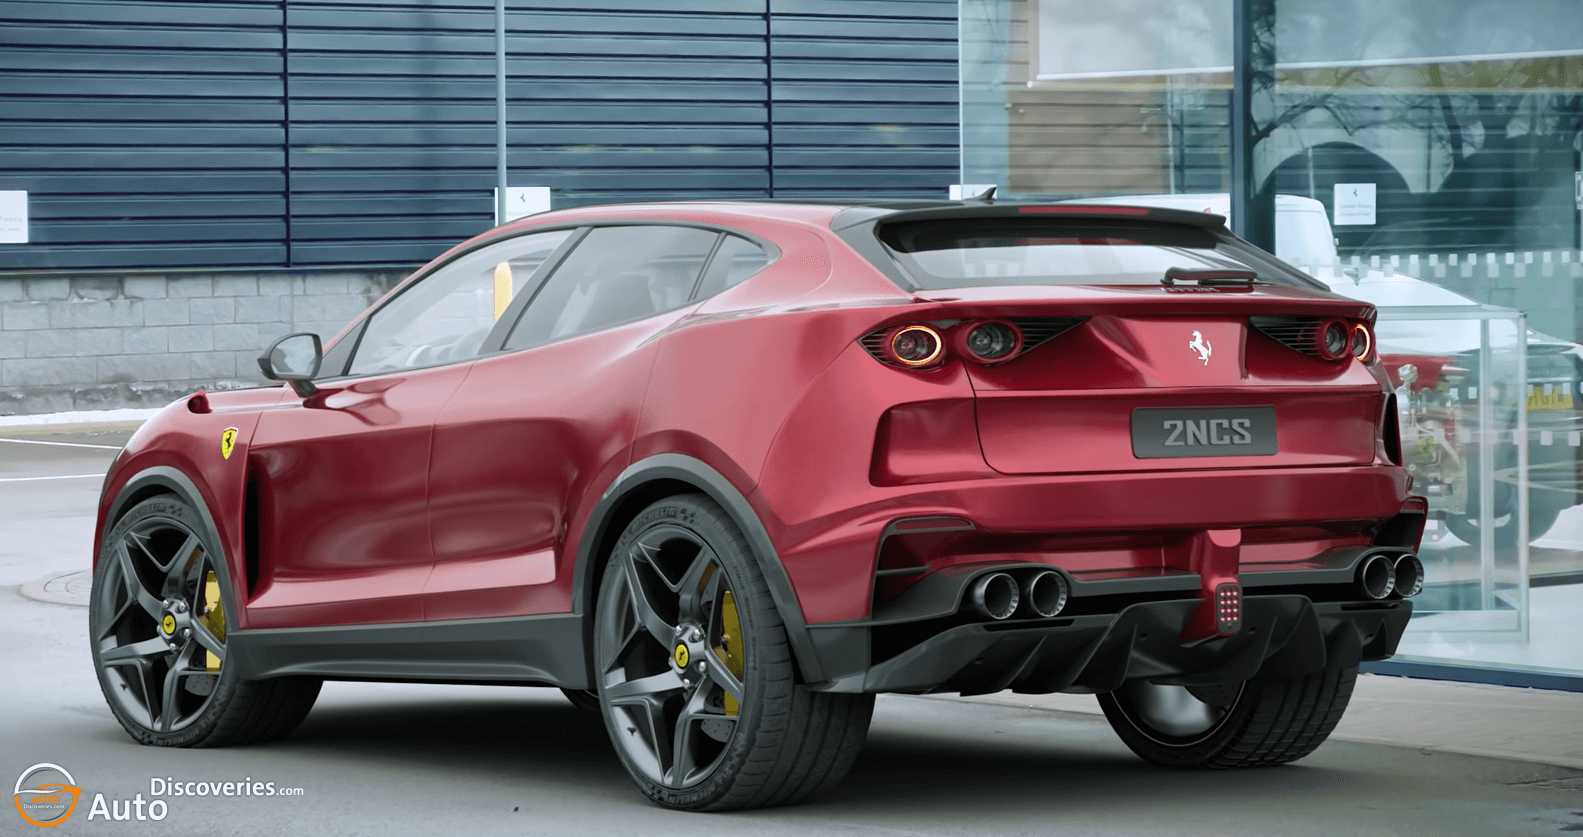 2023 Ferrari Purosagnue SUV, First Look Concept By 2NCS Auto Discoveries